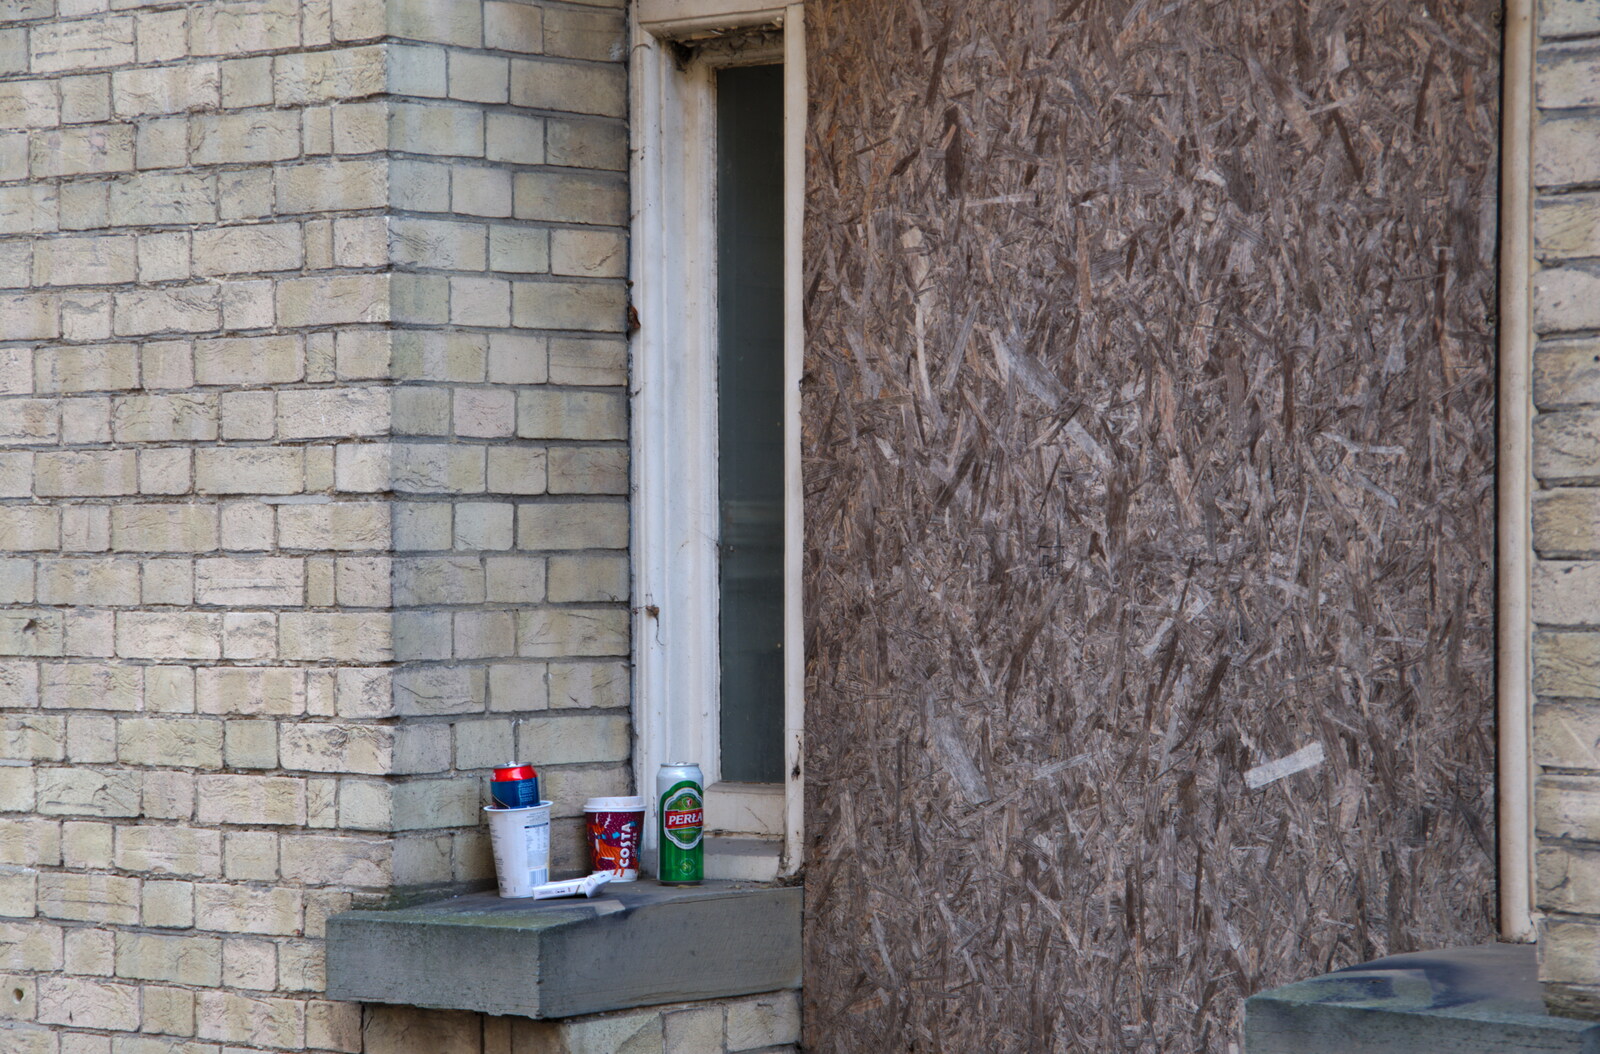 Beer can on a windowsill from Exam Day Dereliction, Ipswich, Suffolk - 13th November 2019